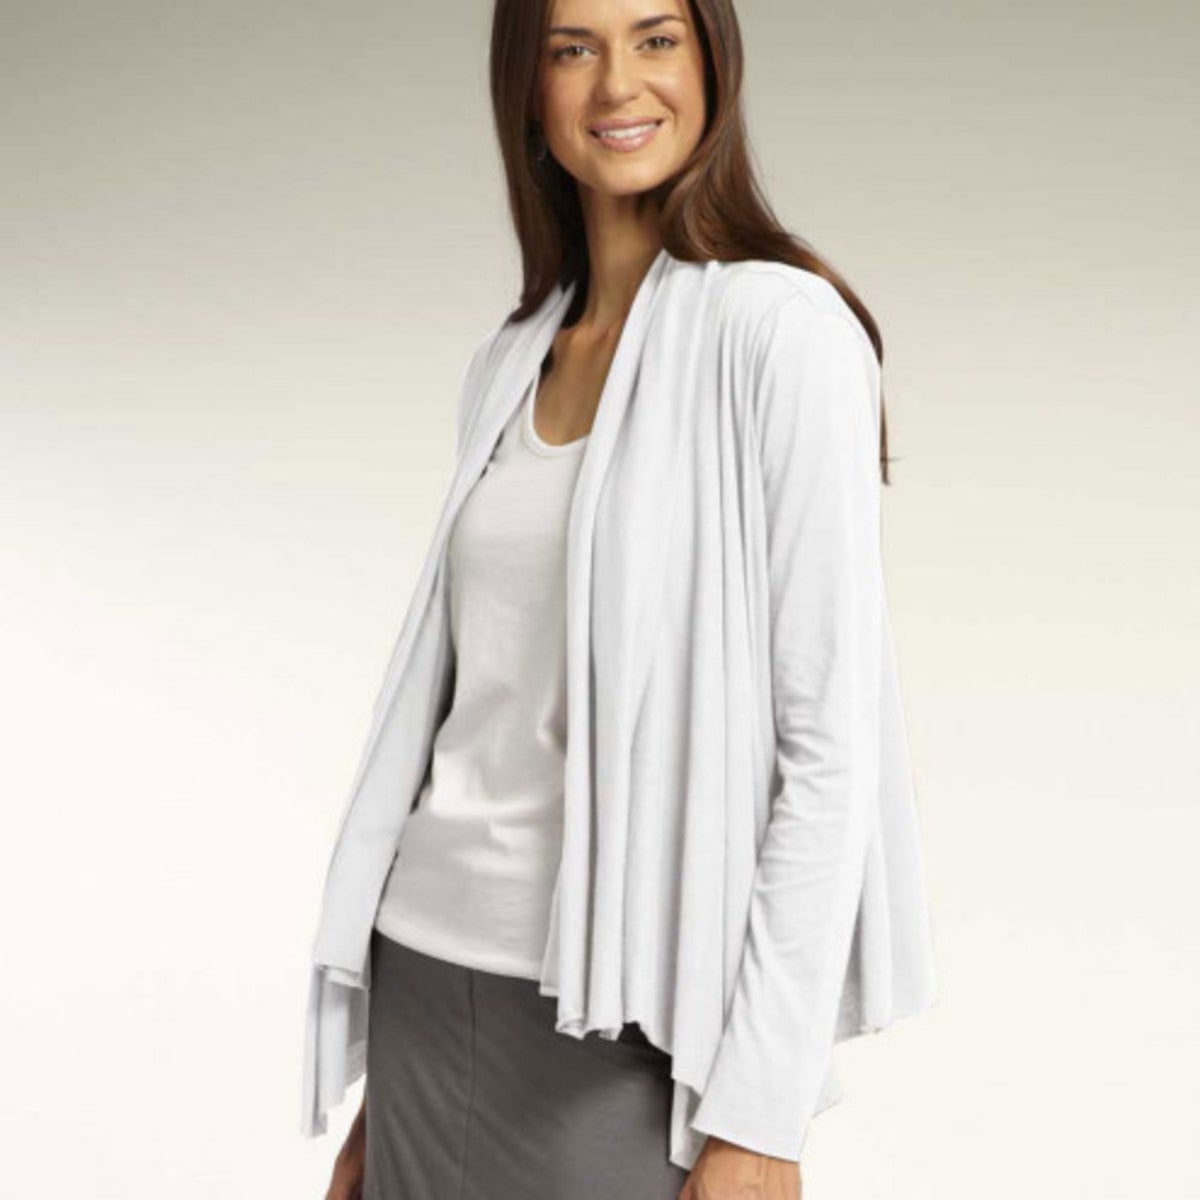 Peach Daily Cardigan - Large - White - Small